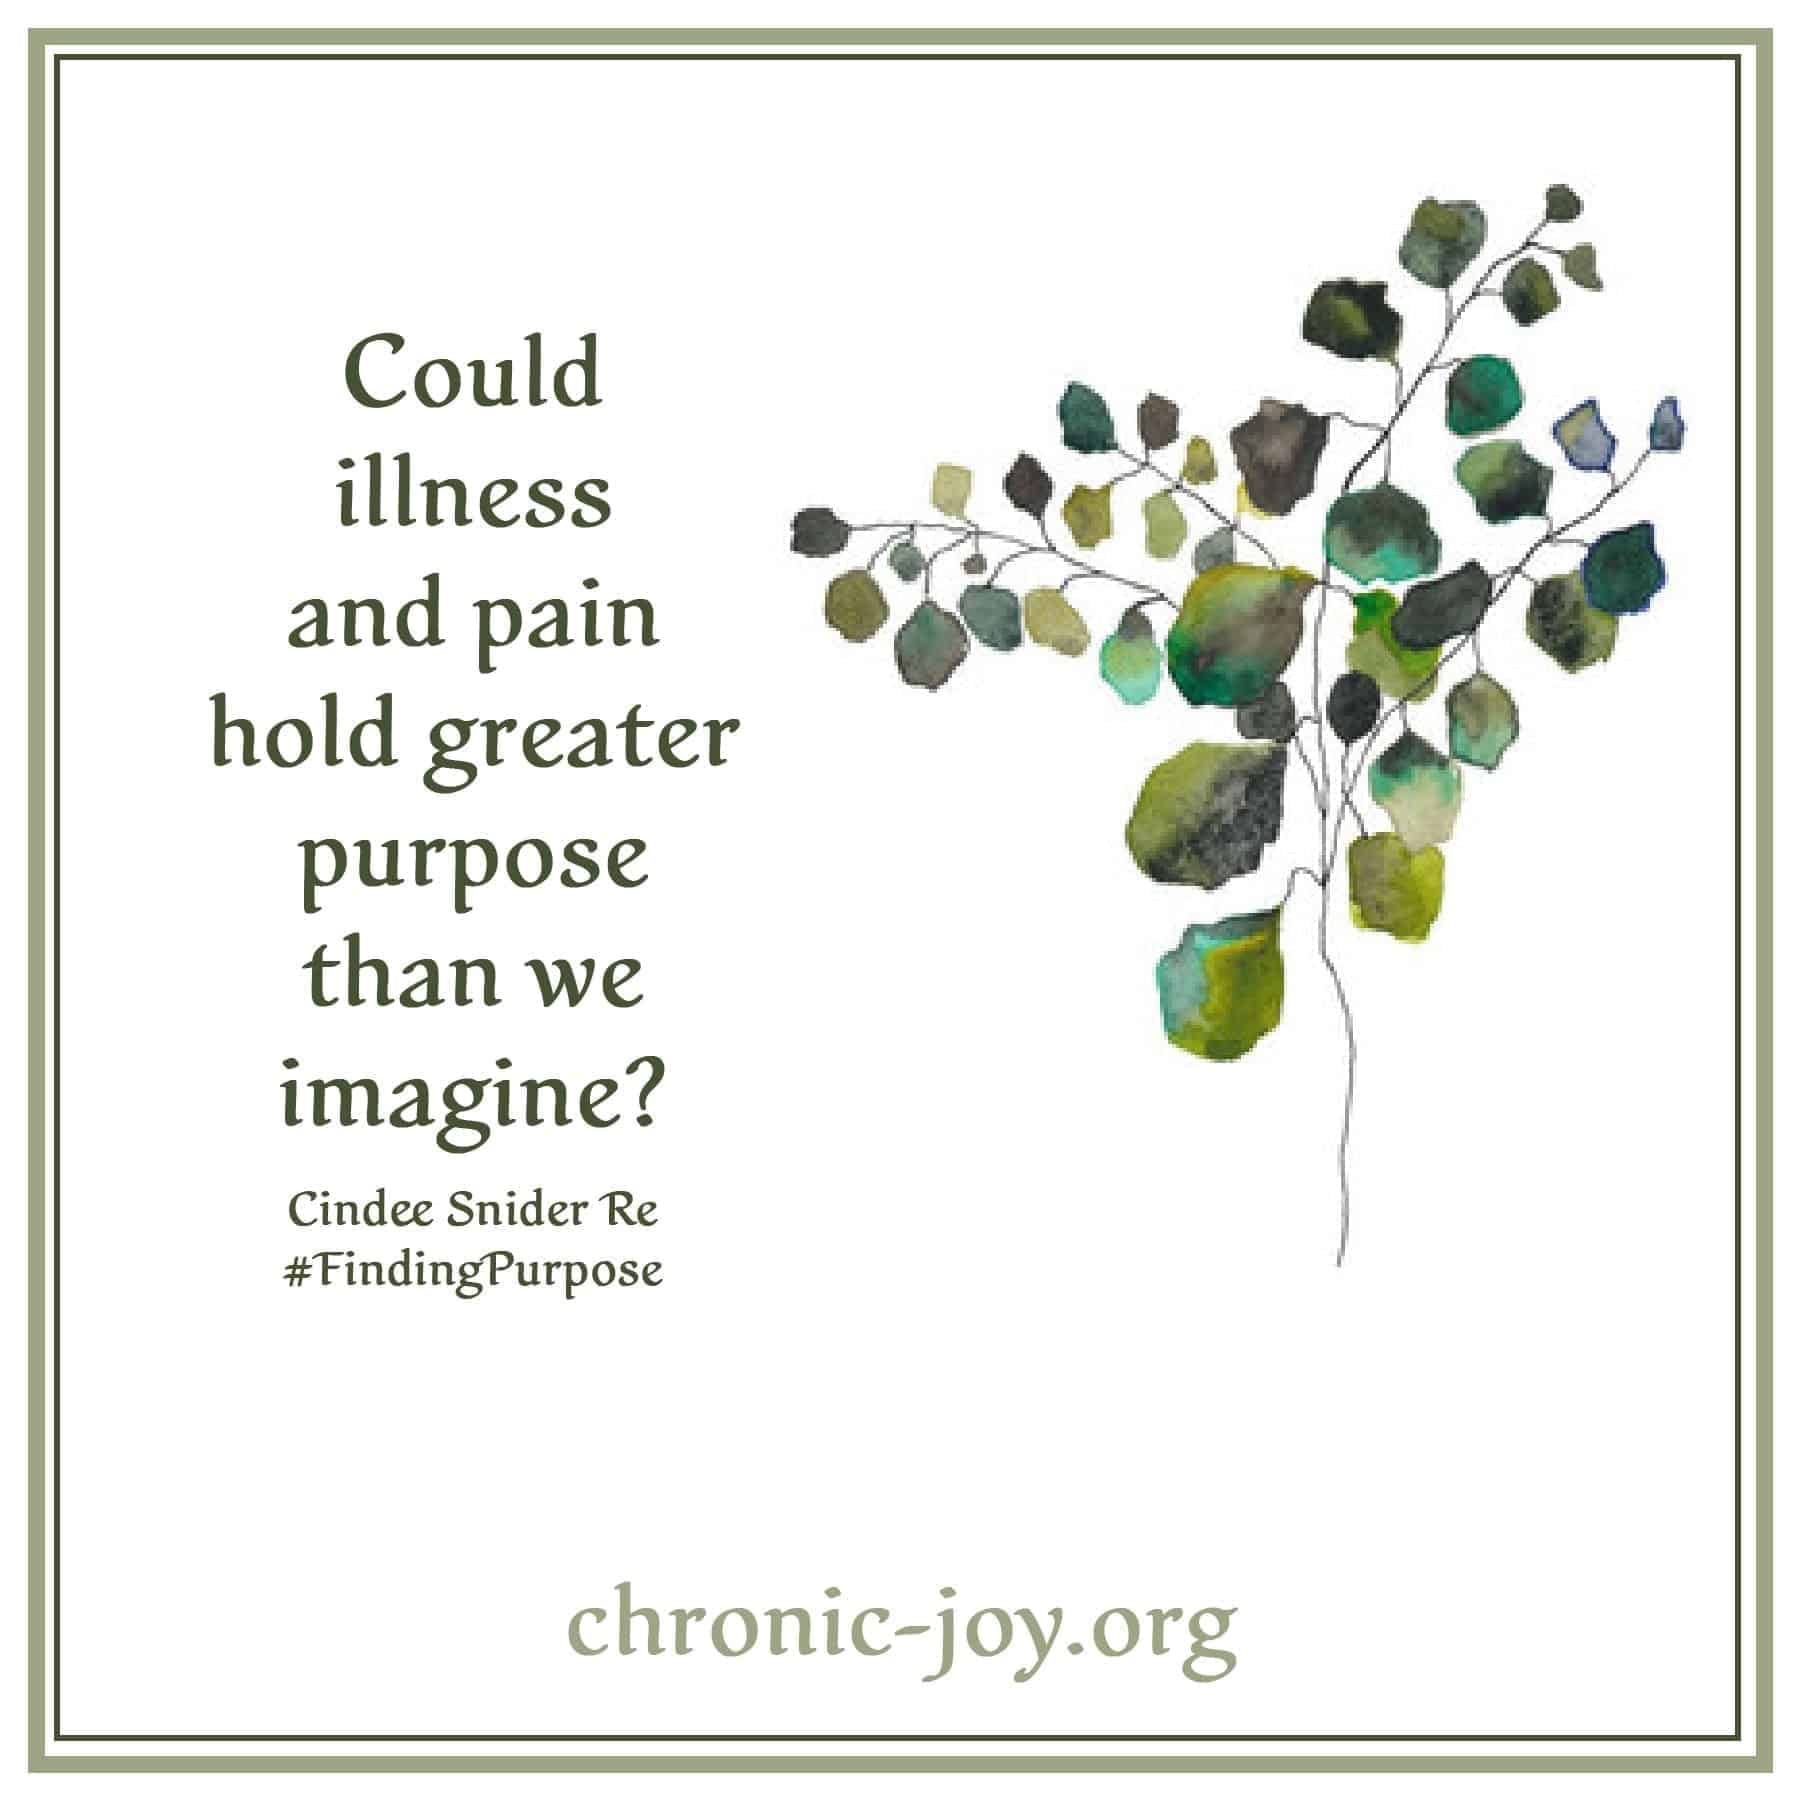 Could illness and pain hold greater purpose than we we imagine?